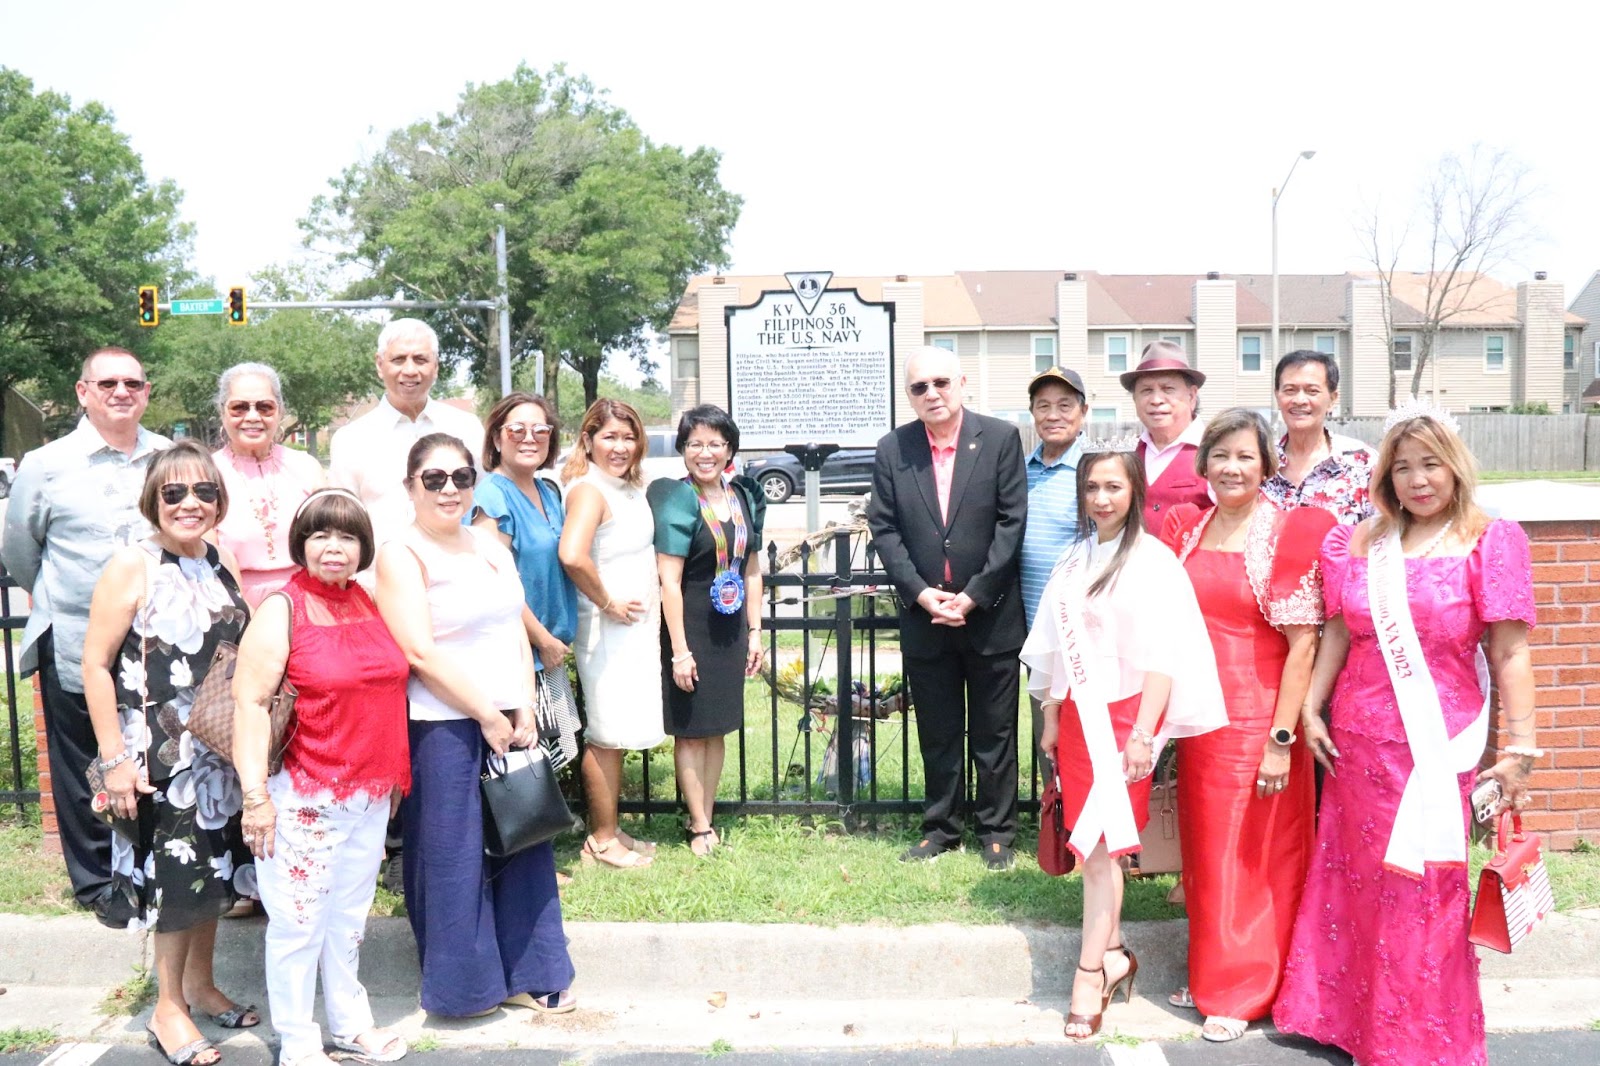 Ambassador Romualdez with CUFOT President Dr. Cynthia Romero (flanking both sides of the marker) and other leaders pose in front of the historical highway marker honoring Filipino navy veterans. The historical marker was unveiled in 2022 and is situated right in front of the Philippine Cultural Center of Virginia Beach.